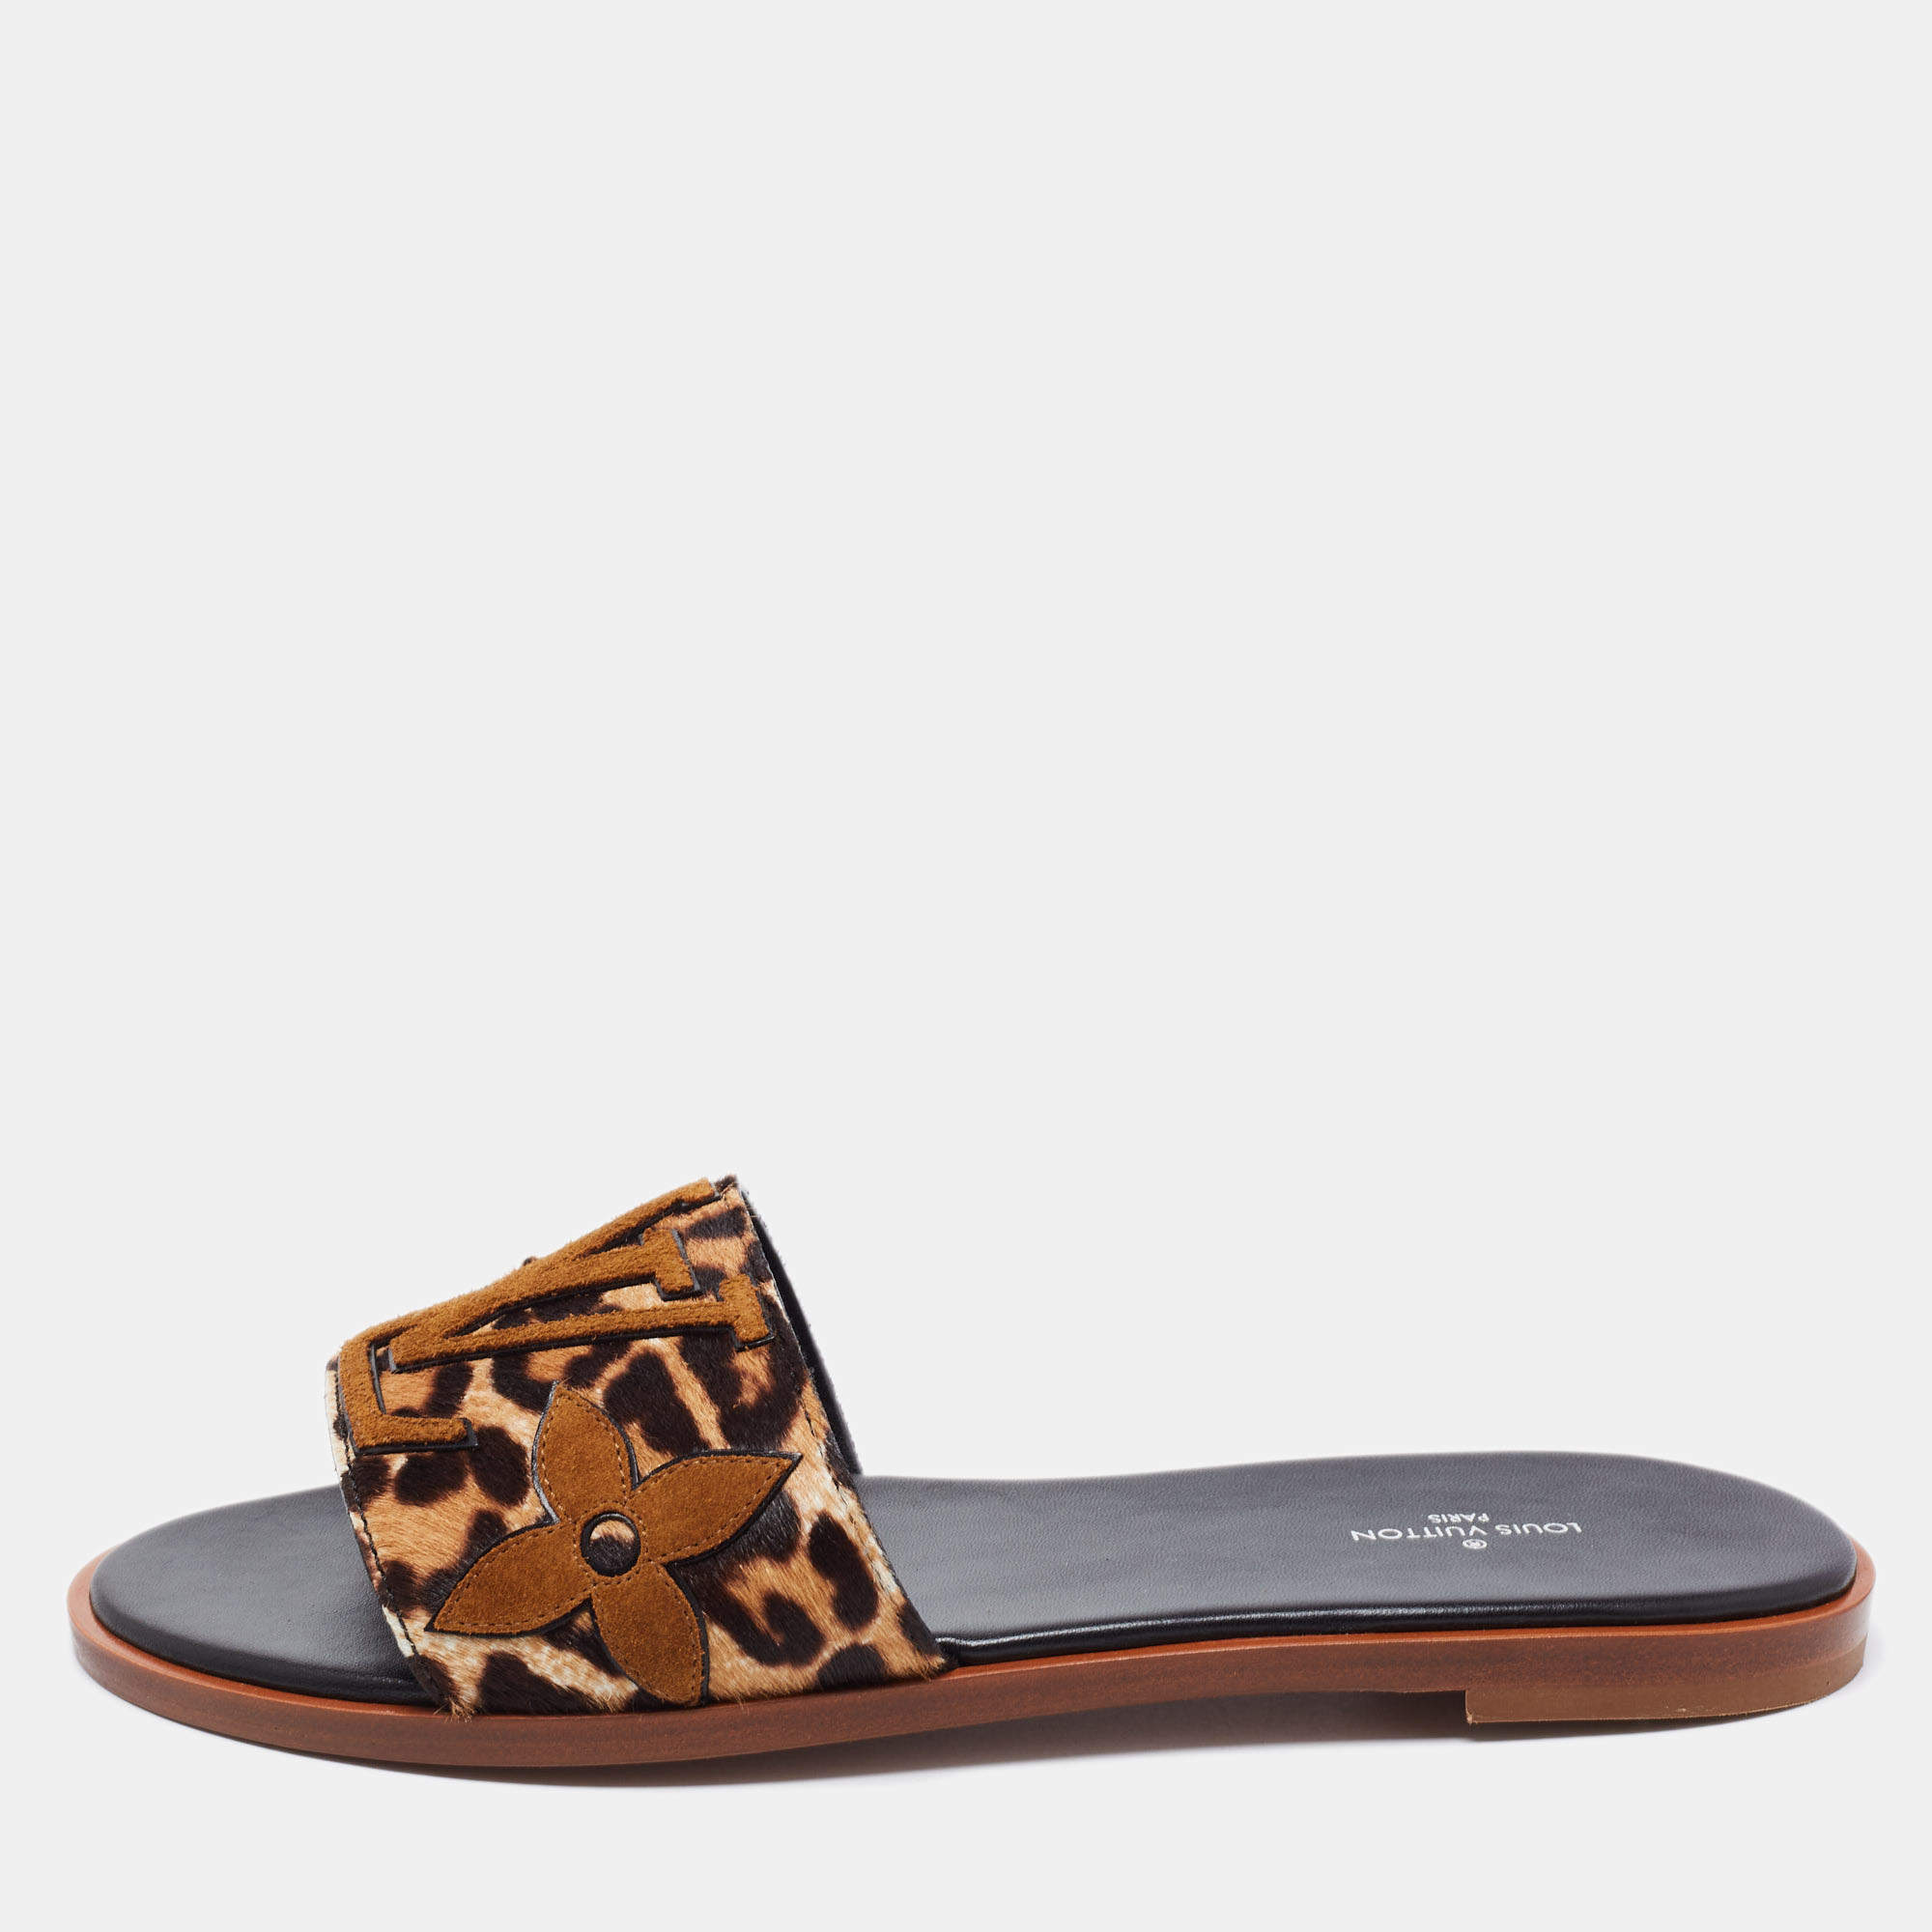 Louis Vuitton Leather Printed Slides - Brown Sandals, Shoes